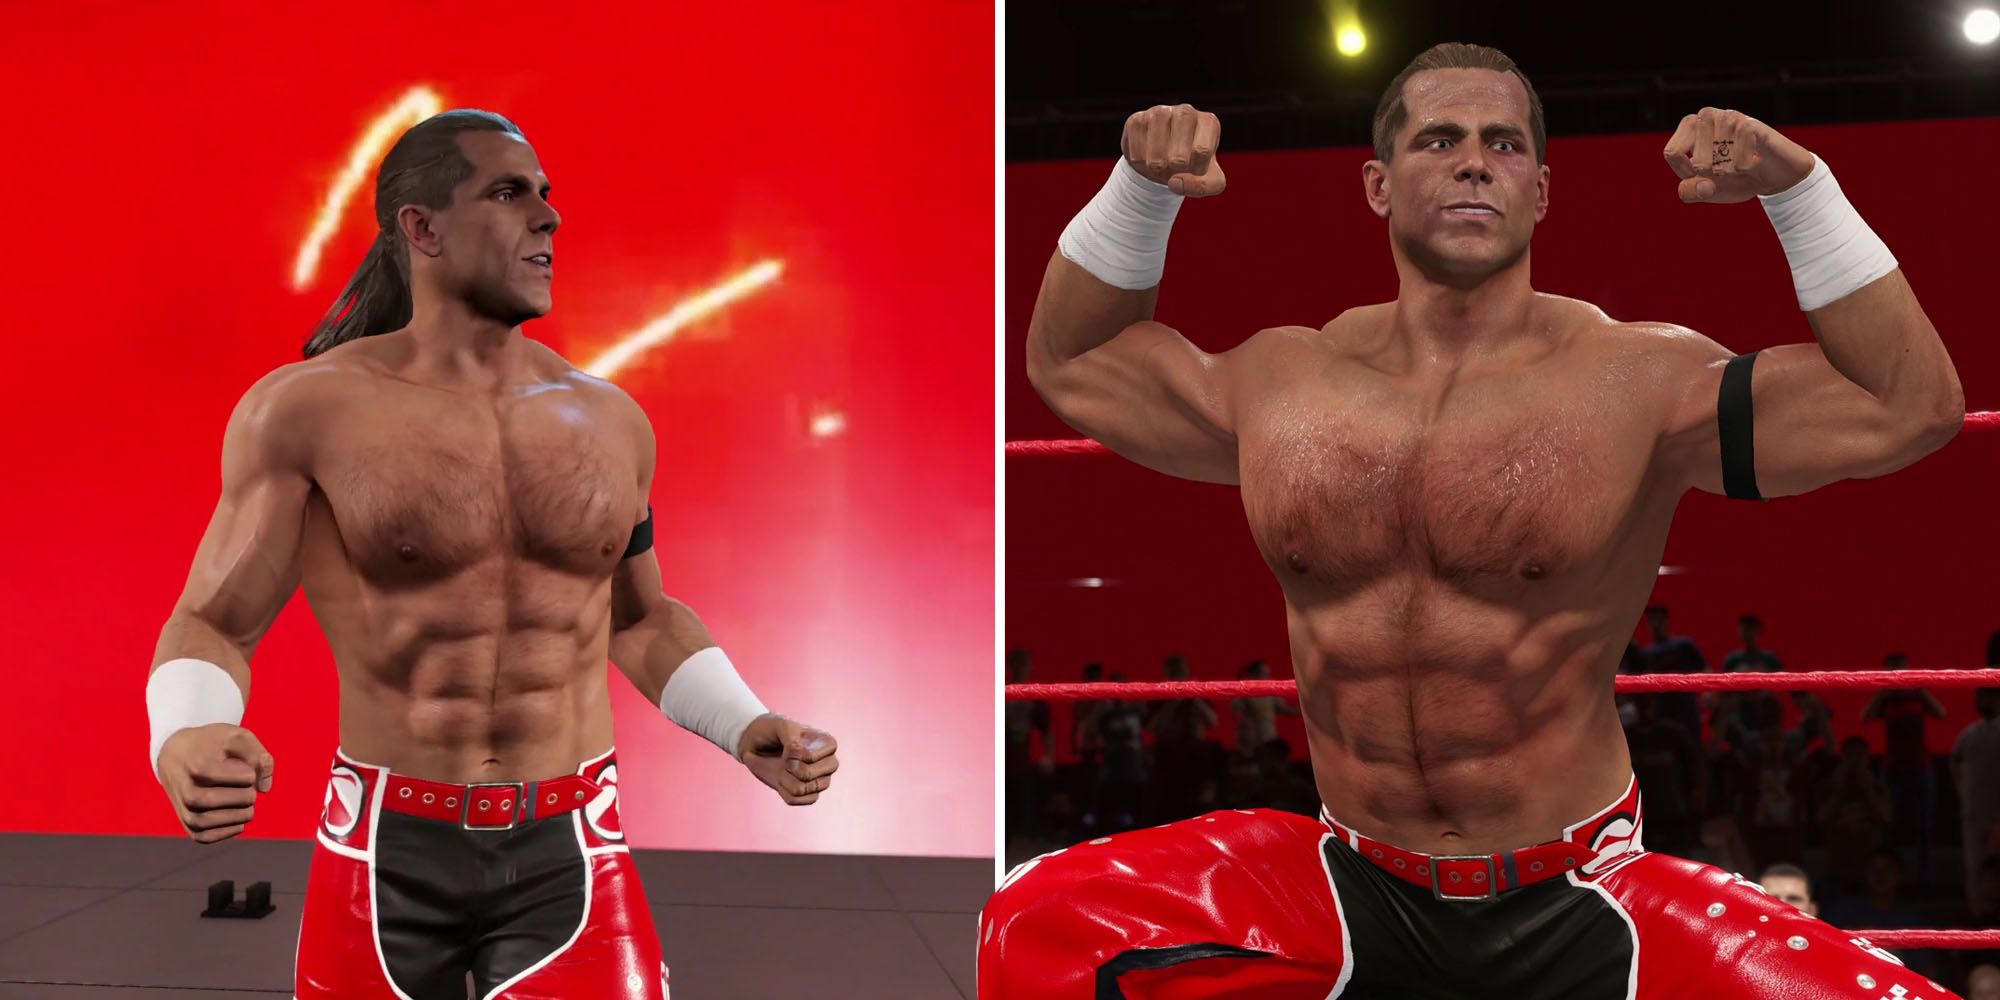 wwe-2k22-how-to-unlock-shawn-michaels-00-featured-image